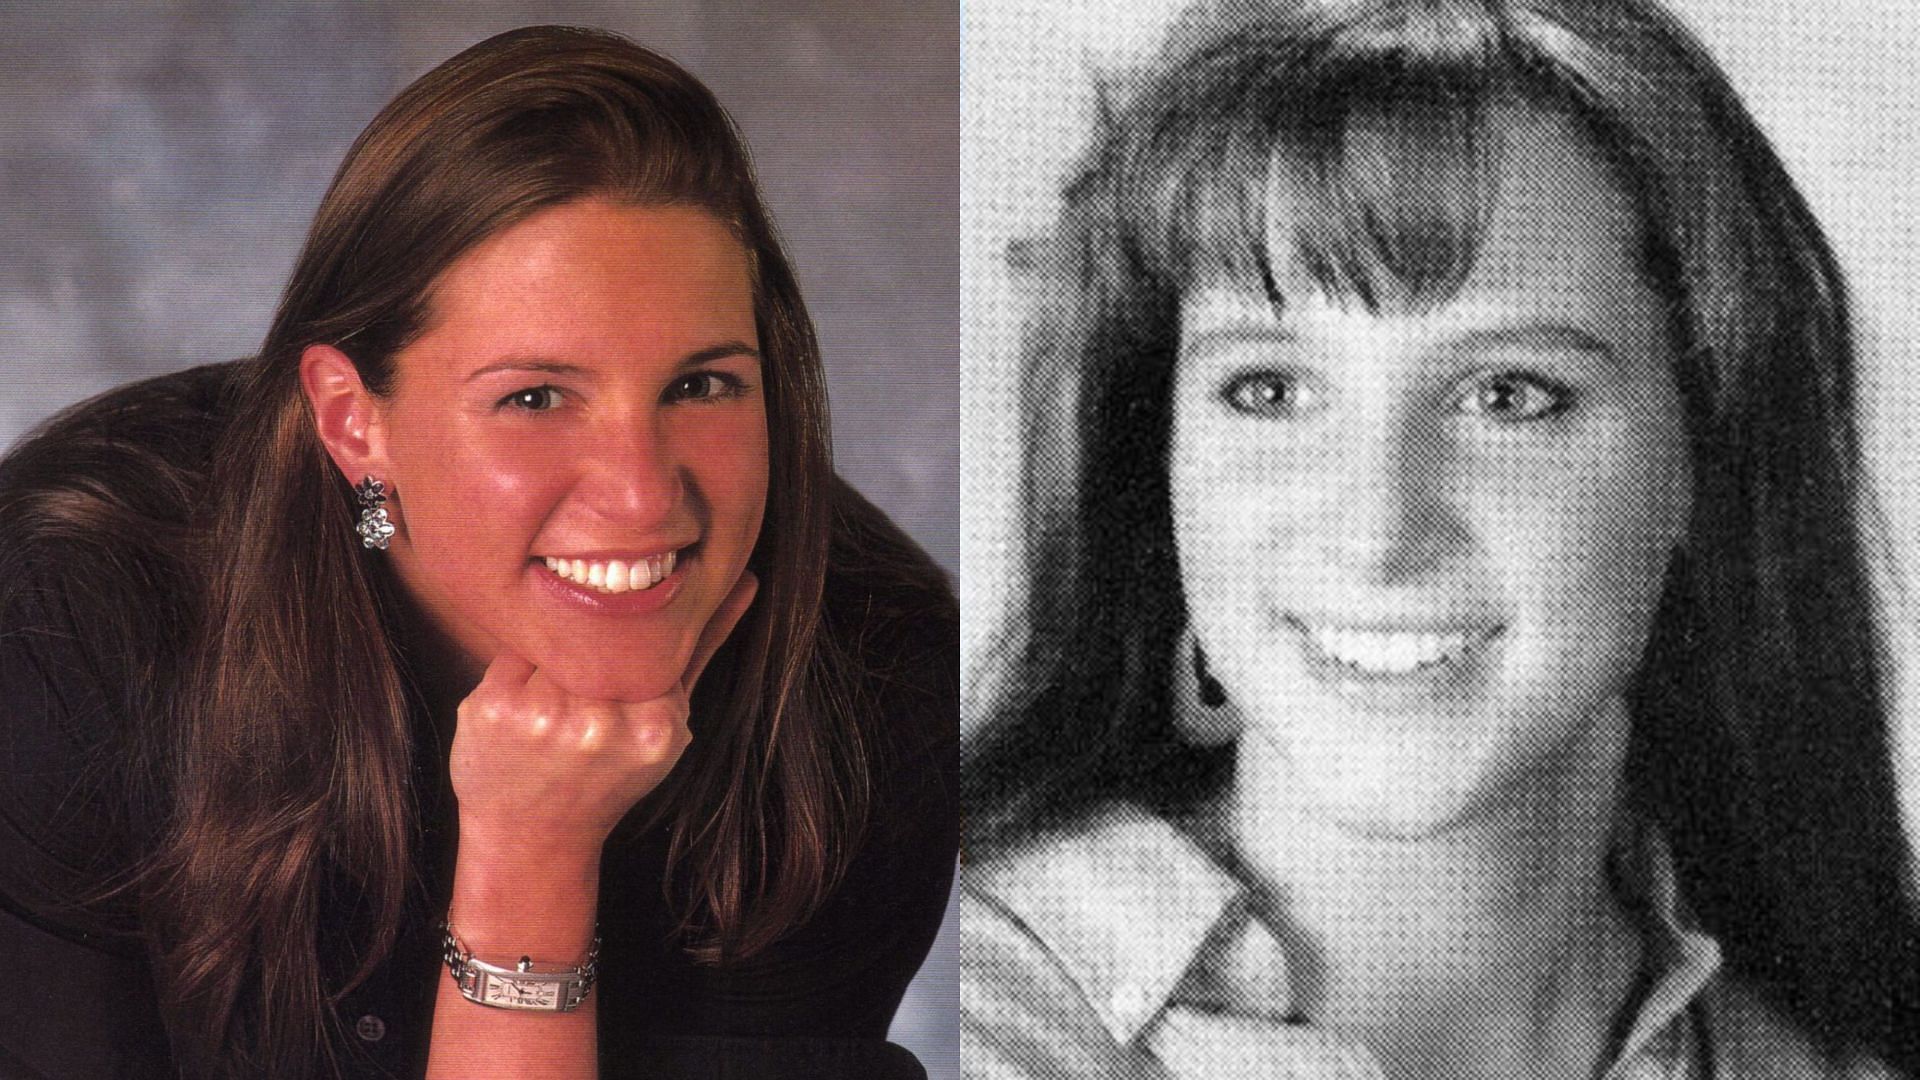 Stephanie McMahon reportedly dated a guy from high school